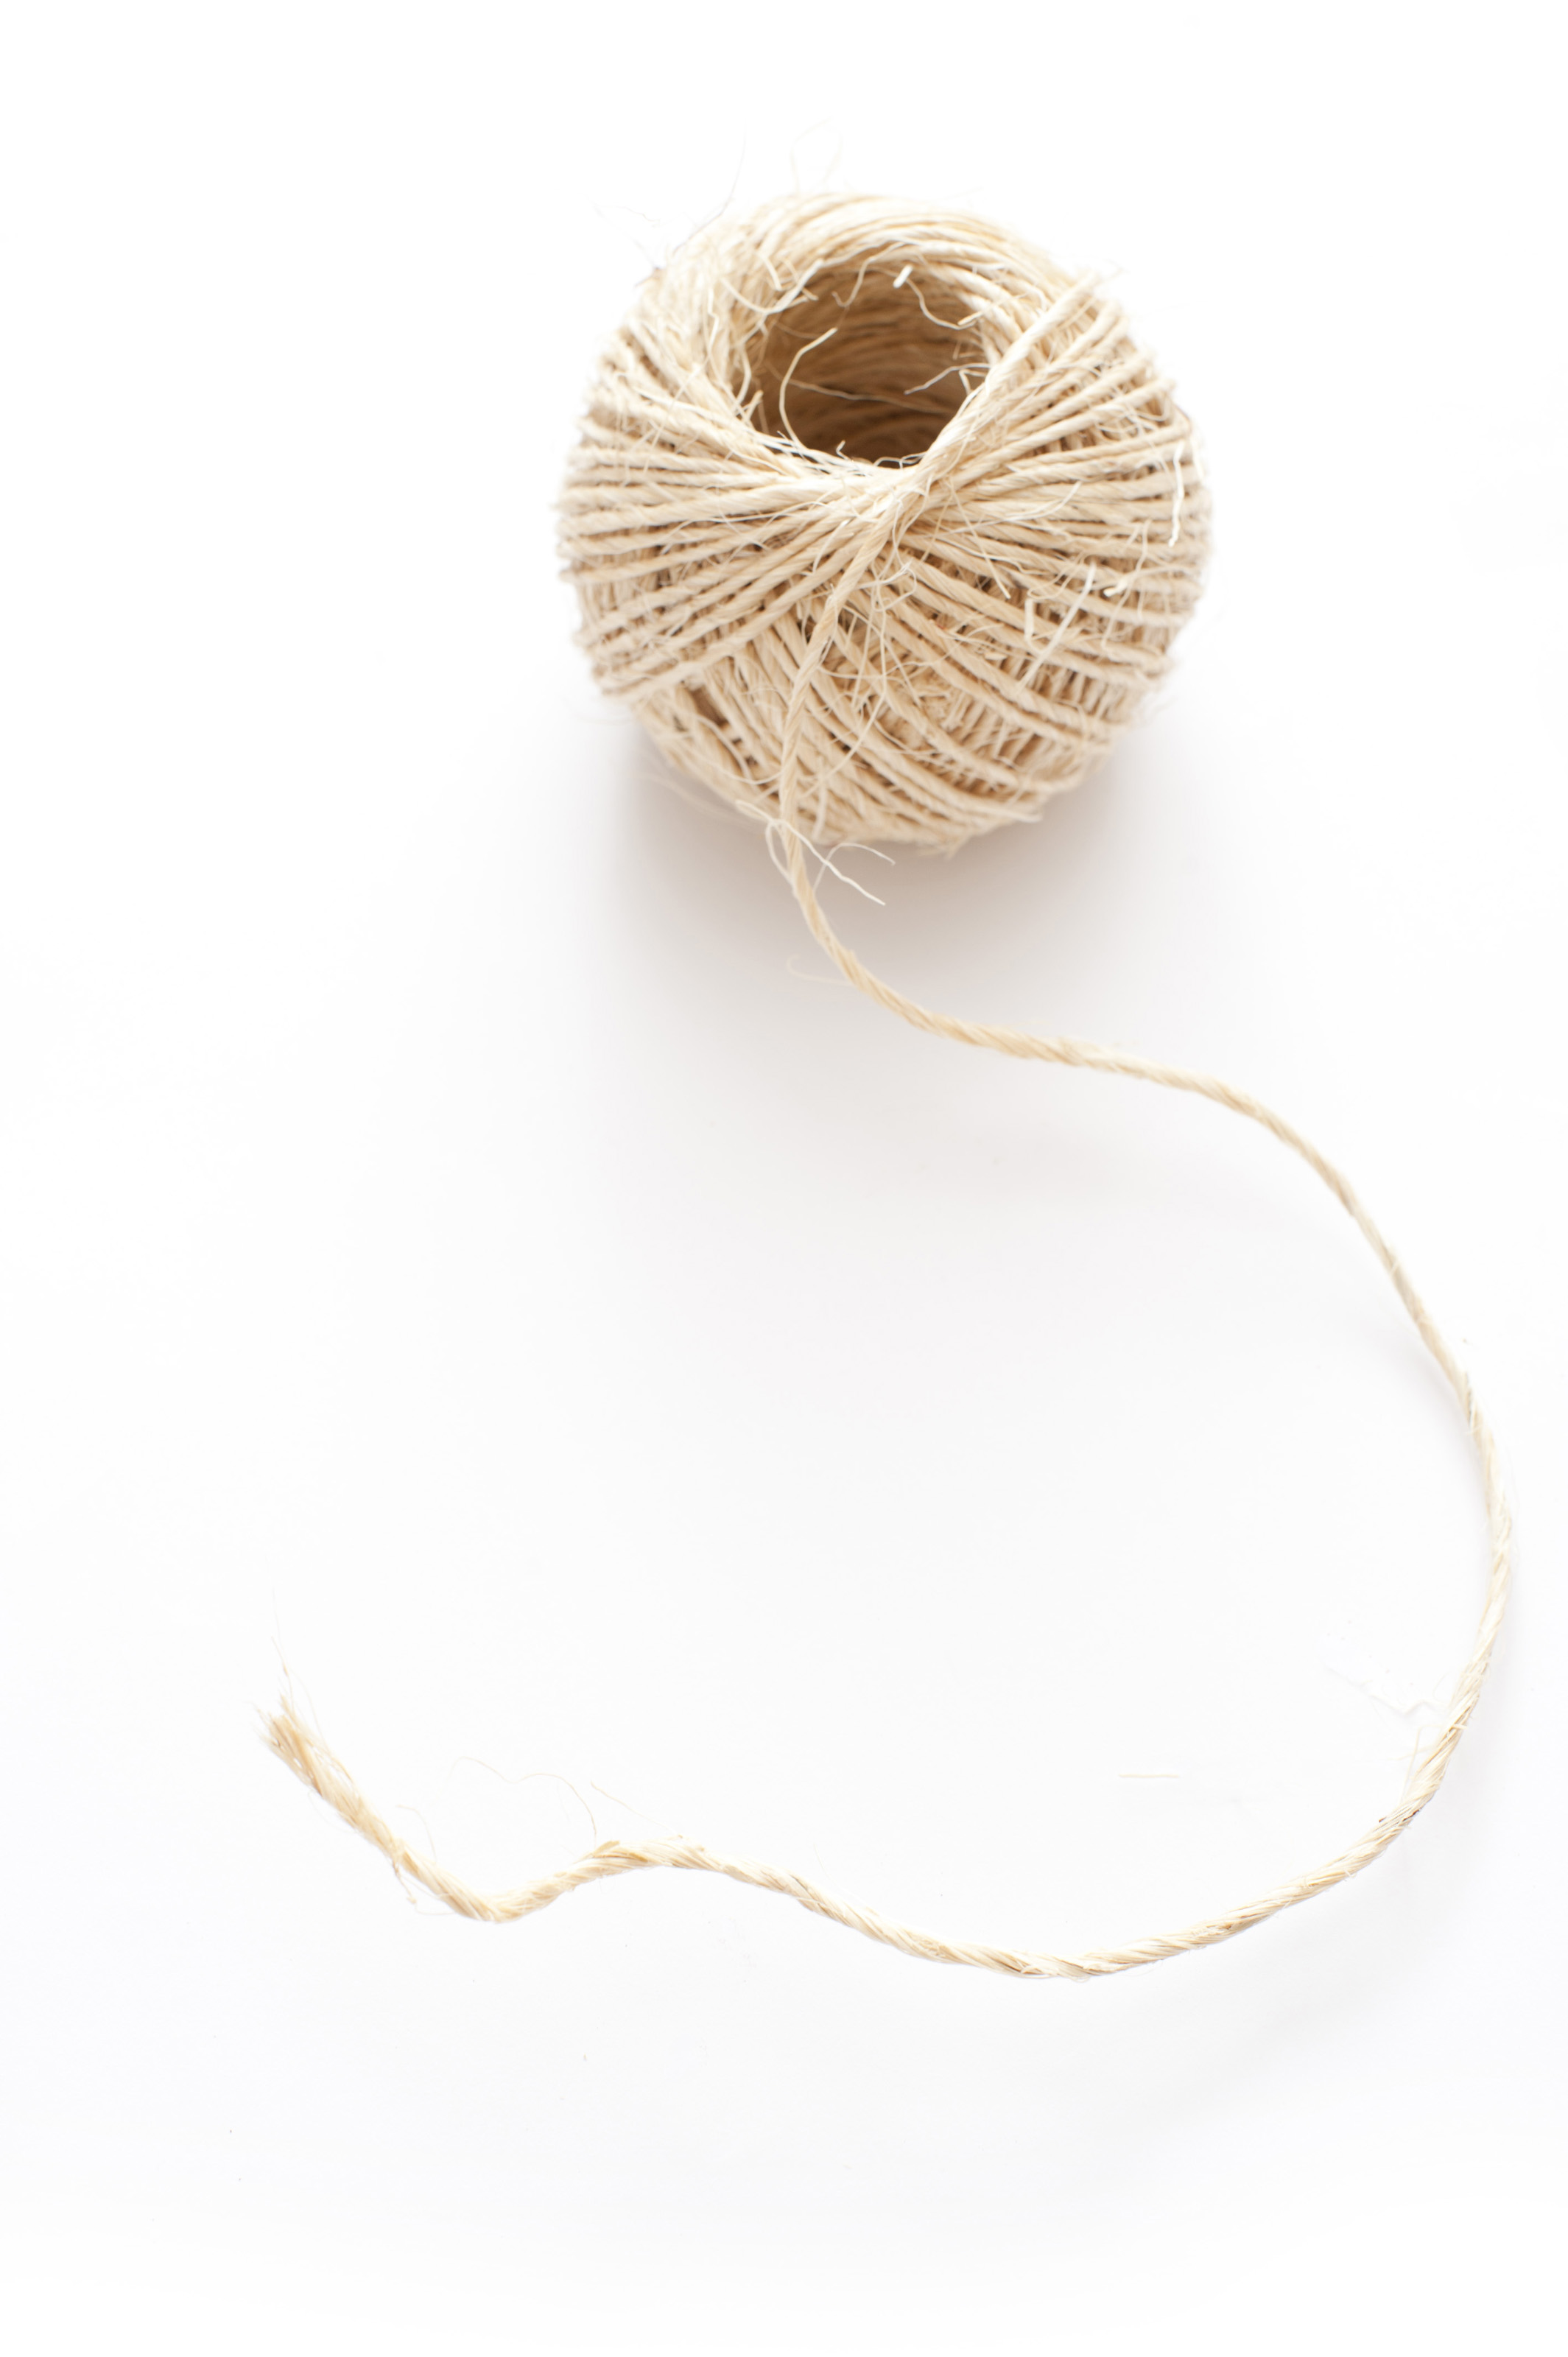 Free Stock Photo 10745 Ball of string or twine